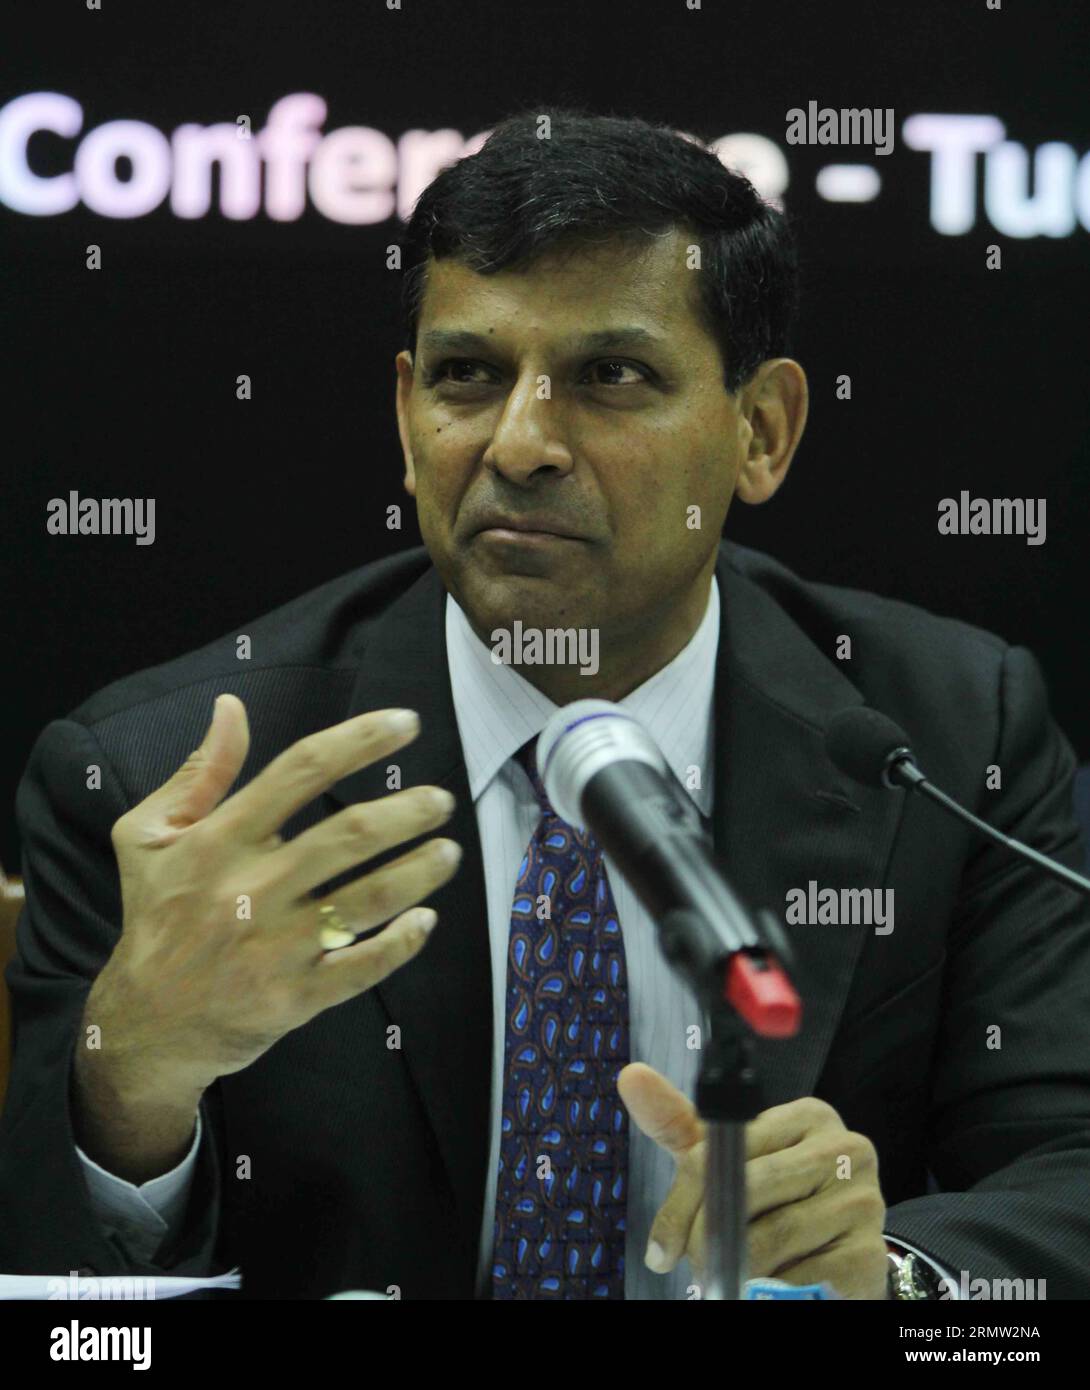 India s central bank Reserve Bank of India Governor Raghuram Rajan speaks before meeting with the bankers for RBI monetary policy review at RBI headquarters in Mumbai, India, Sept. 30, 2014. The Reserve Bank of India (RBI) Tuesday decided to keep key interest rates unchanged in its fourth bi-monthly policy review. ) INDIA-MUMBAI-BANK Stringer PUBLICATIONxNOTxINxCHN   India S Central Bank Reserve Bank of India Governor Raghuram Rajan Speaks Before Meeting With The Bankers for RBI Monetary Policy REVIEW AT RBI Headquarters in Mumbai India Sept 30 2014 The Reserve Bank of India RBI Tuesday decide Stock Photo